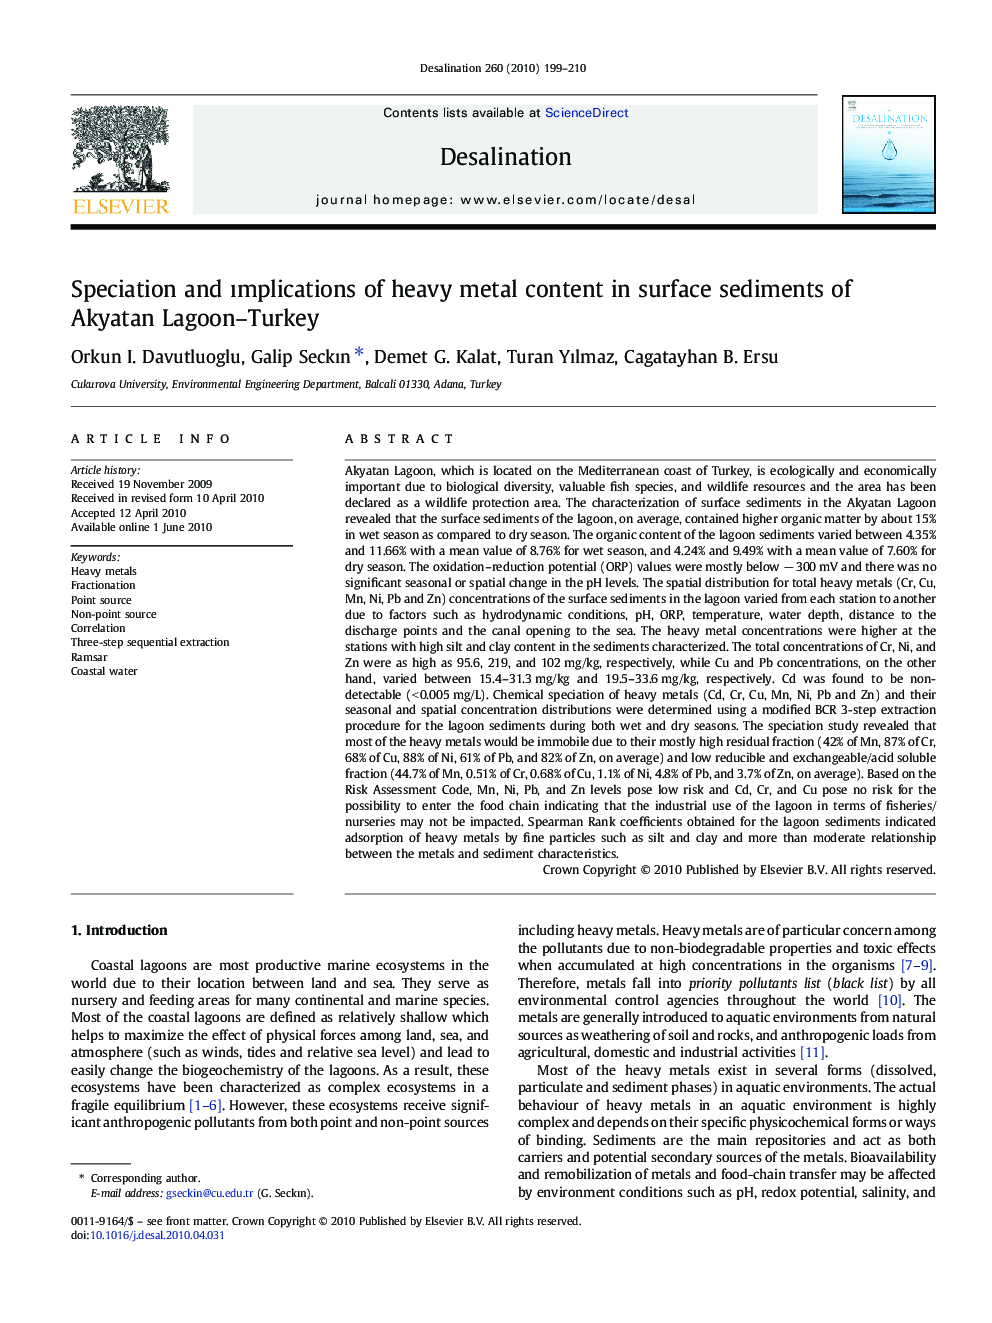 Speciation and ımplications of heavy metal content in surface sediments of Akyatan Lagoon–Turkey